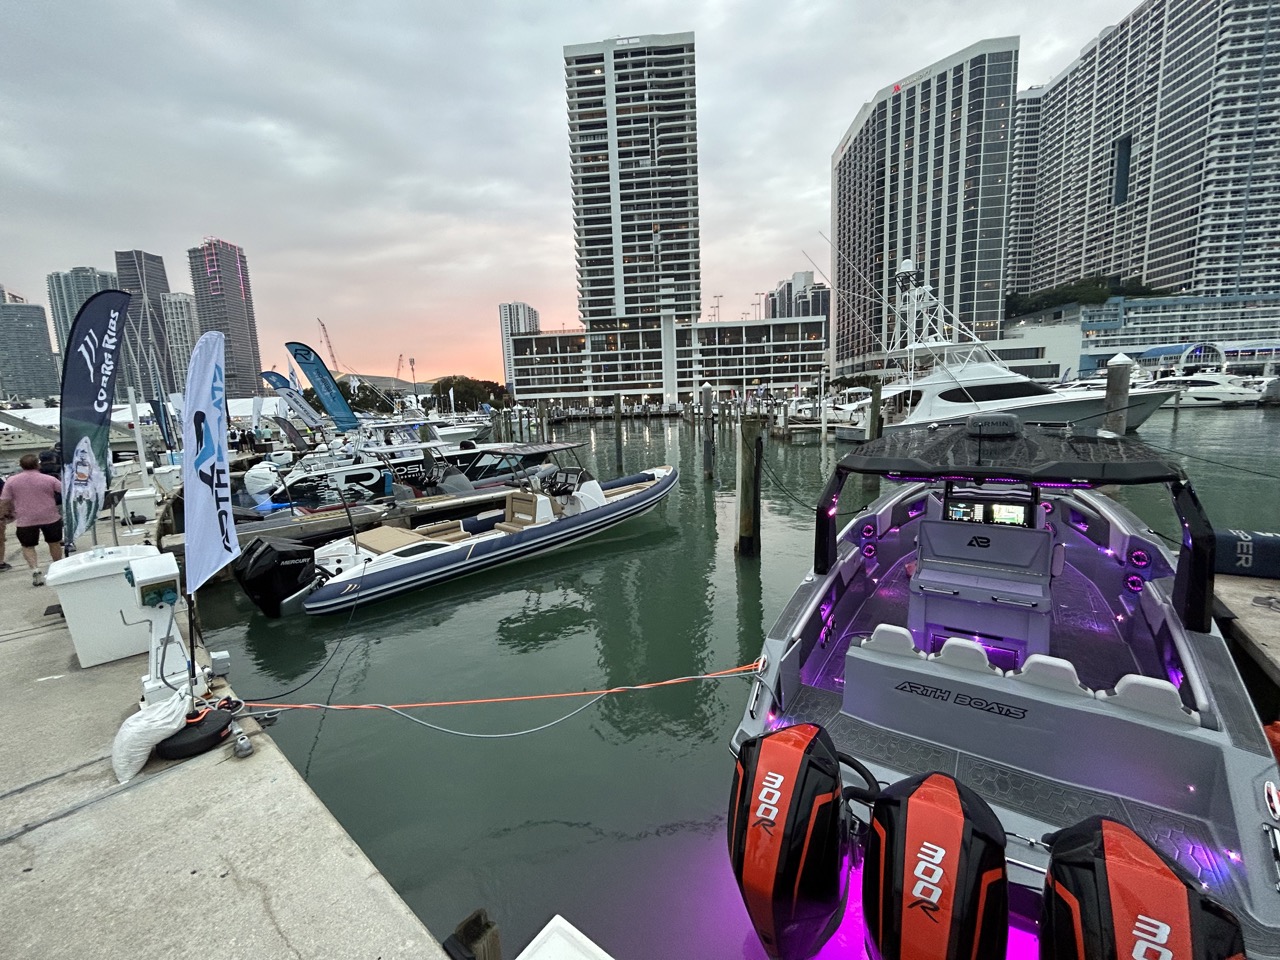 The docks at the Miami International Boat Show